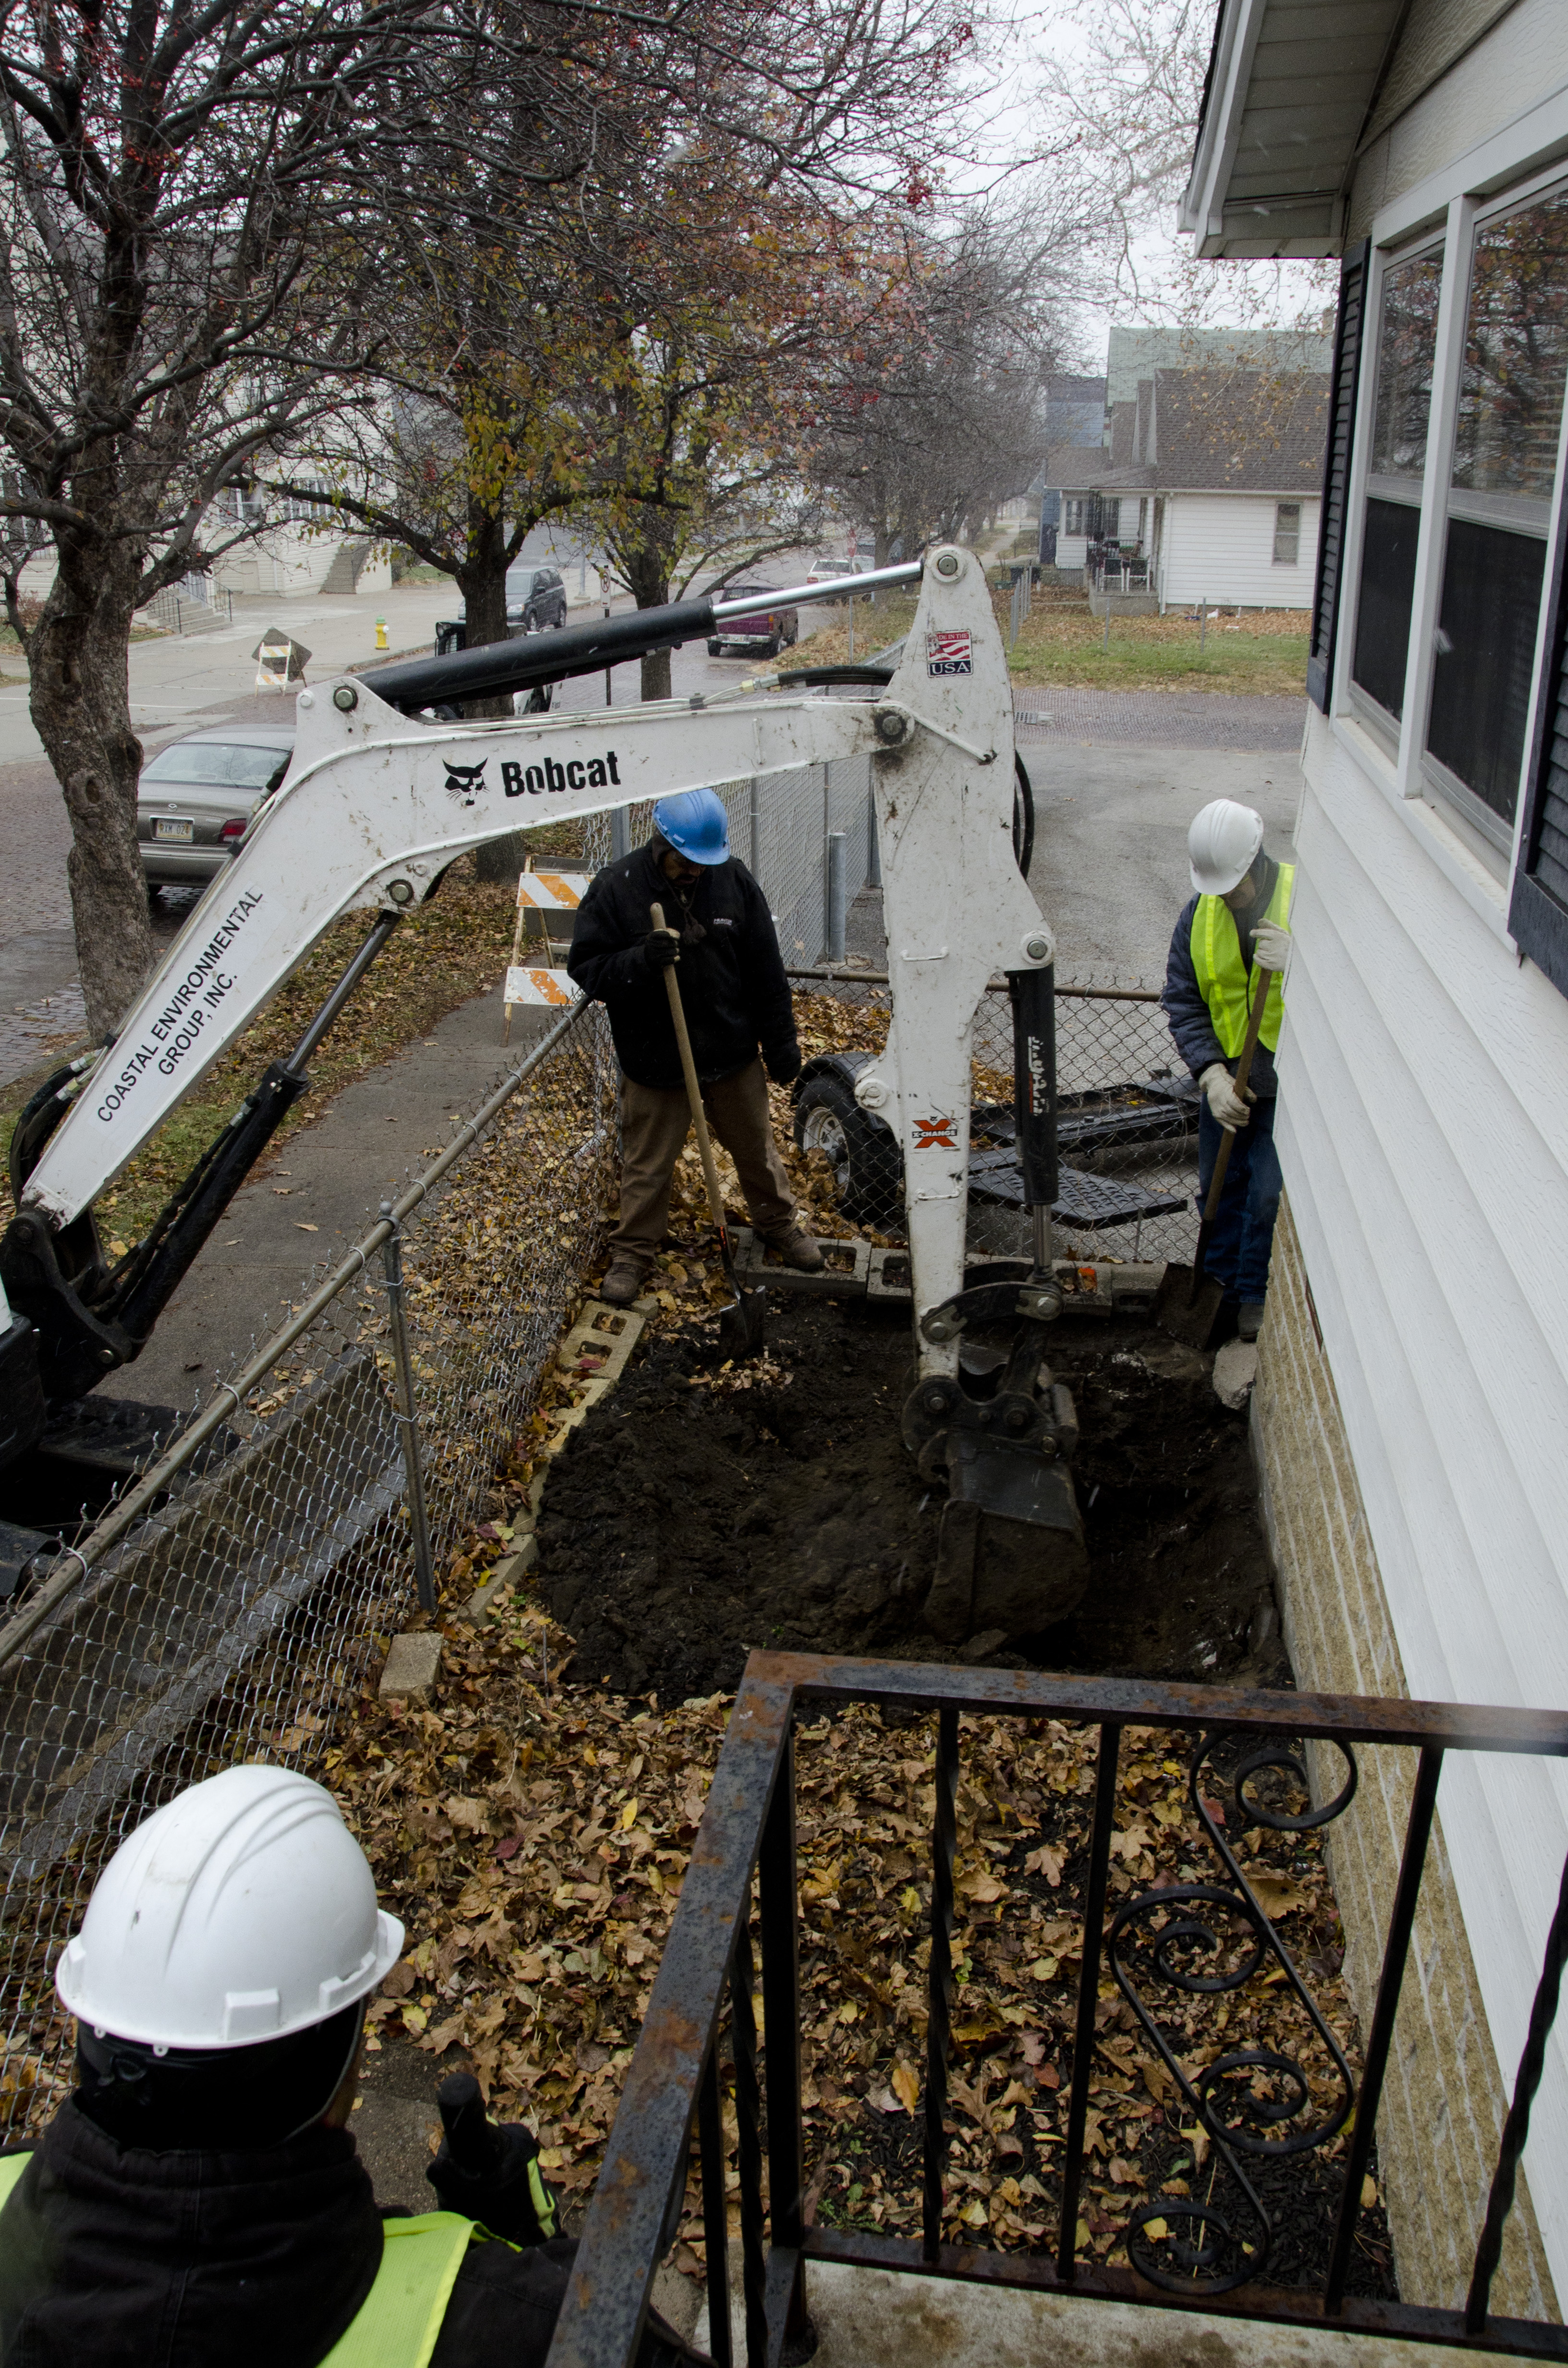 Residential yard remediation activity